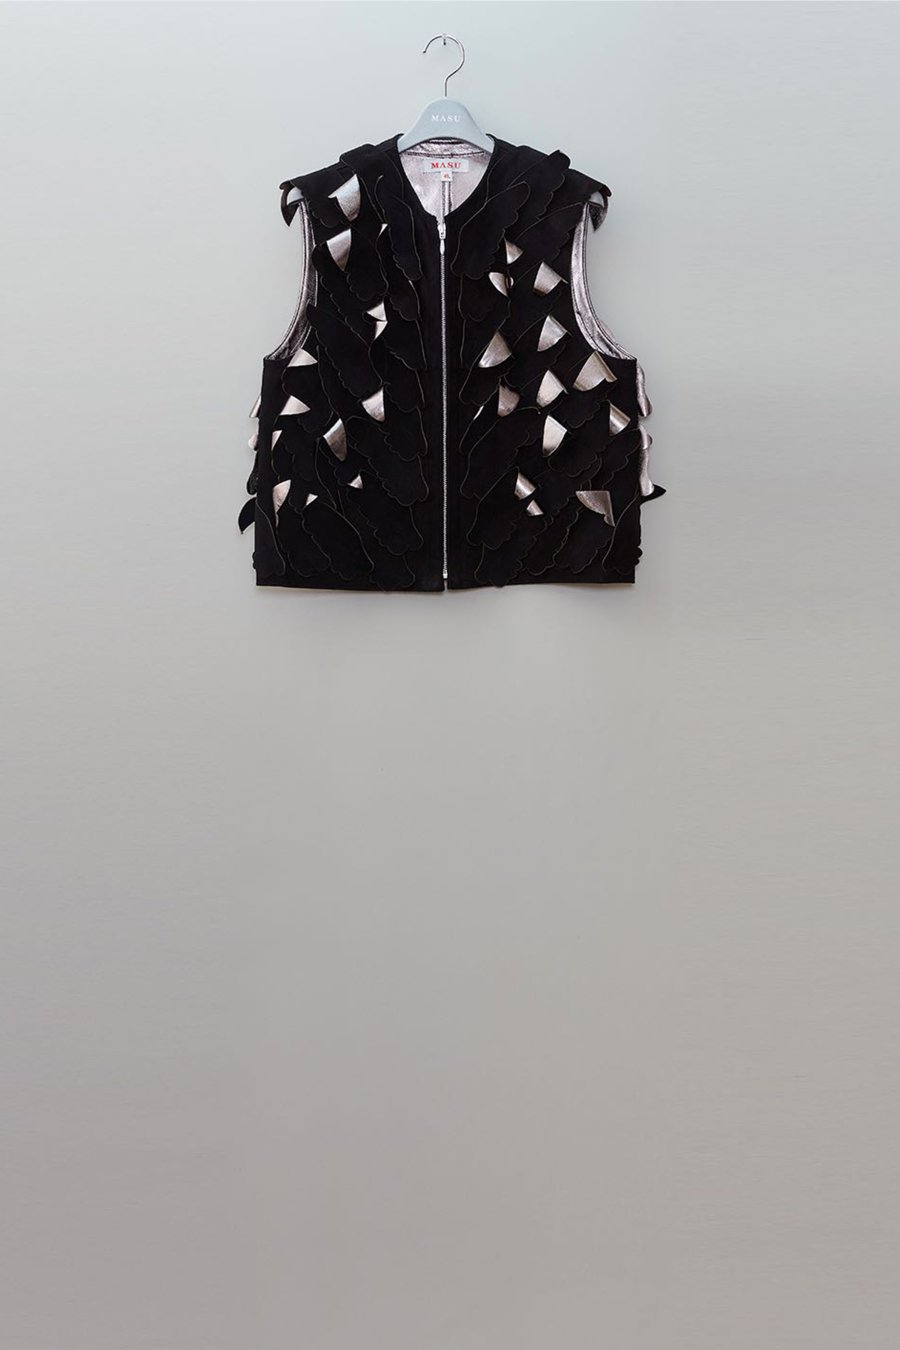 MASU  ANGEL WING LEATHER VEST(BLACK)<img class='new_mark_img2' src='https://img.shop-pro.jp/img/new/icons15.gif' style='border:none;display:inline;margin:0px;padding:0px;width:auto;' />